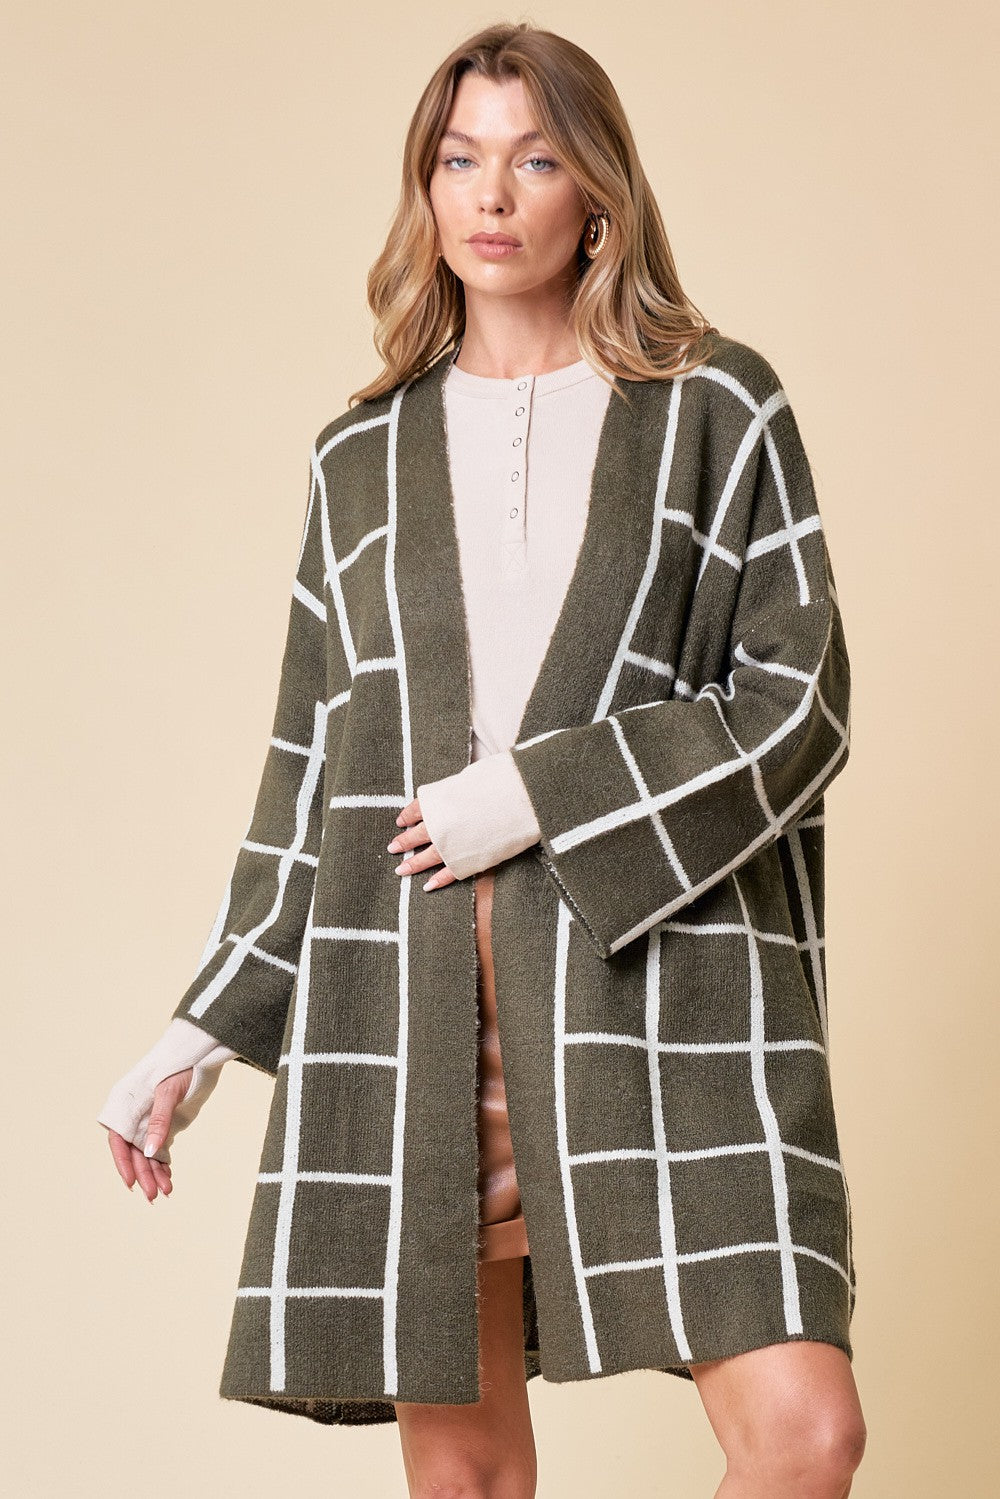 Beauty Of Winter Olive Cardigan